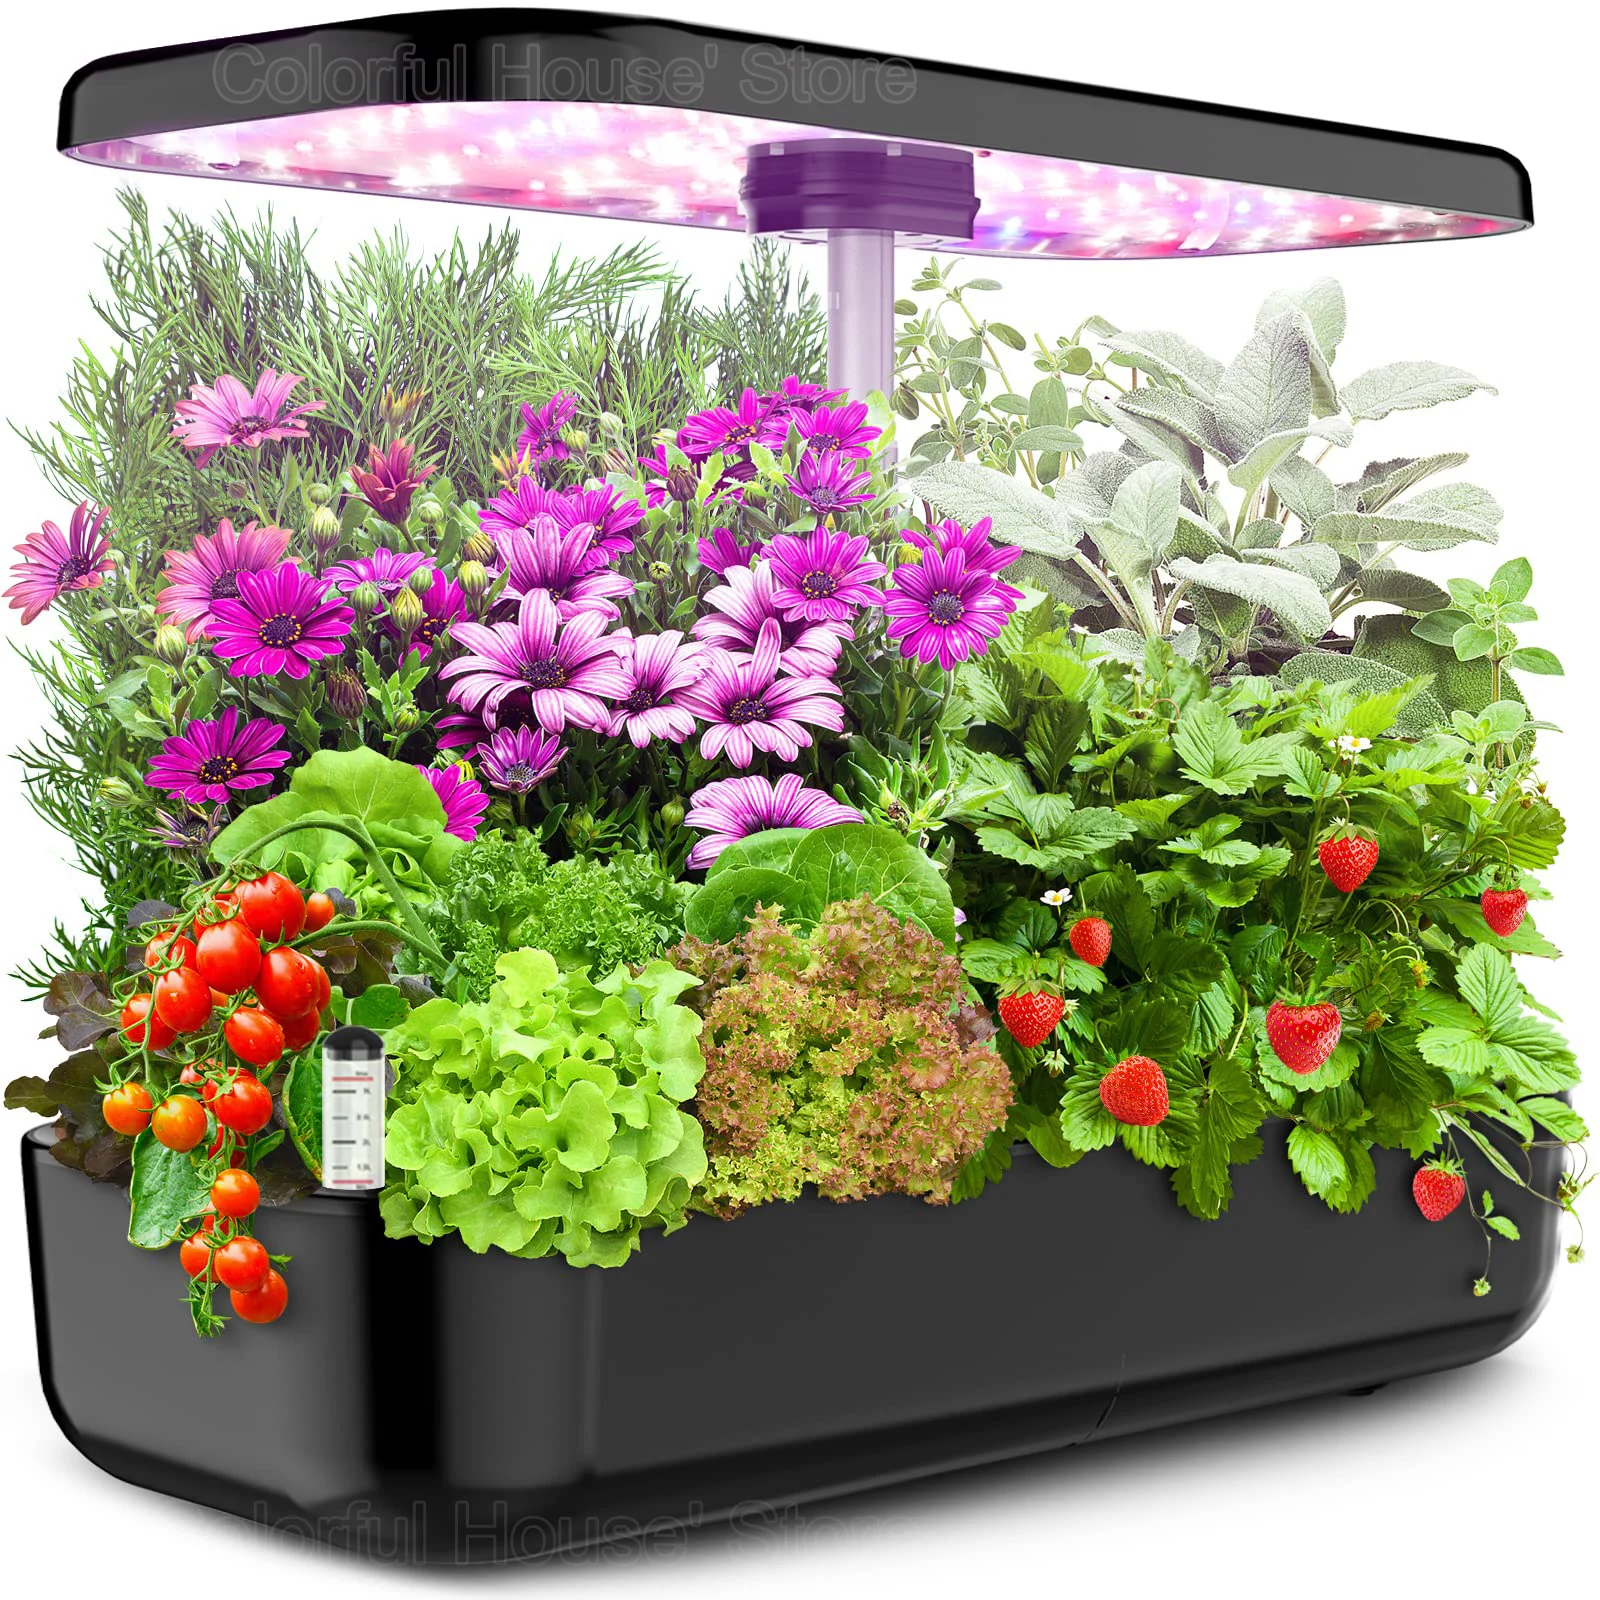 Hydroponics Growing System 12 Pods Indoor Herb Garden Kit Automatic Timing LED Grow Lights Smart Water Pump for Home Flower Pots